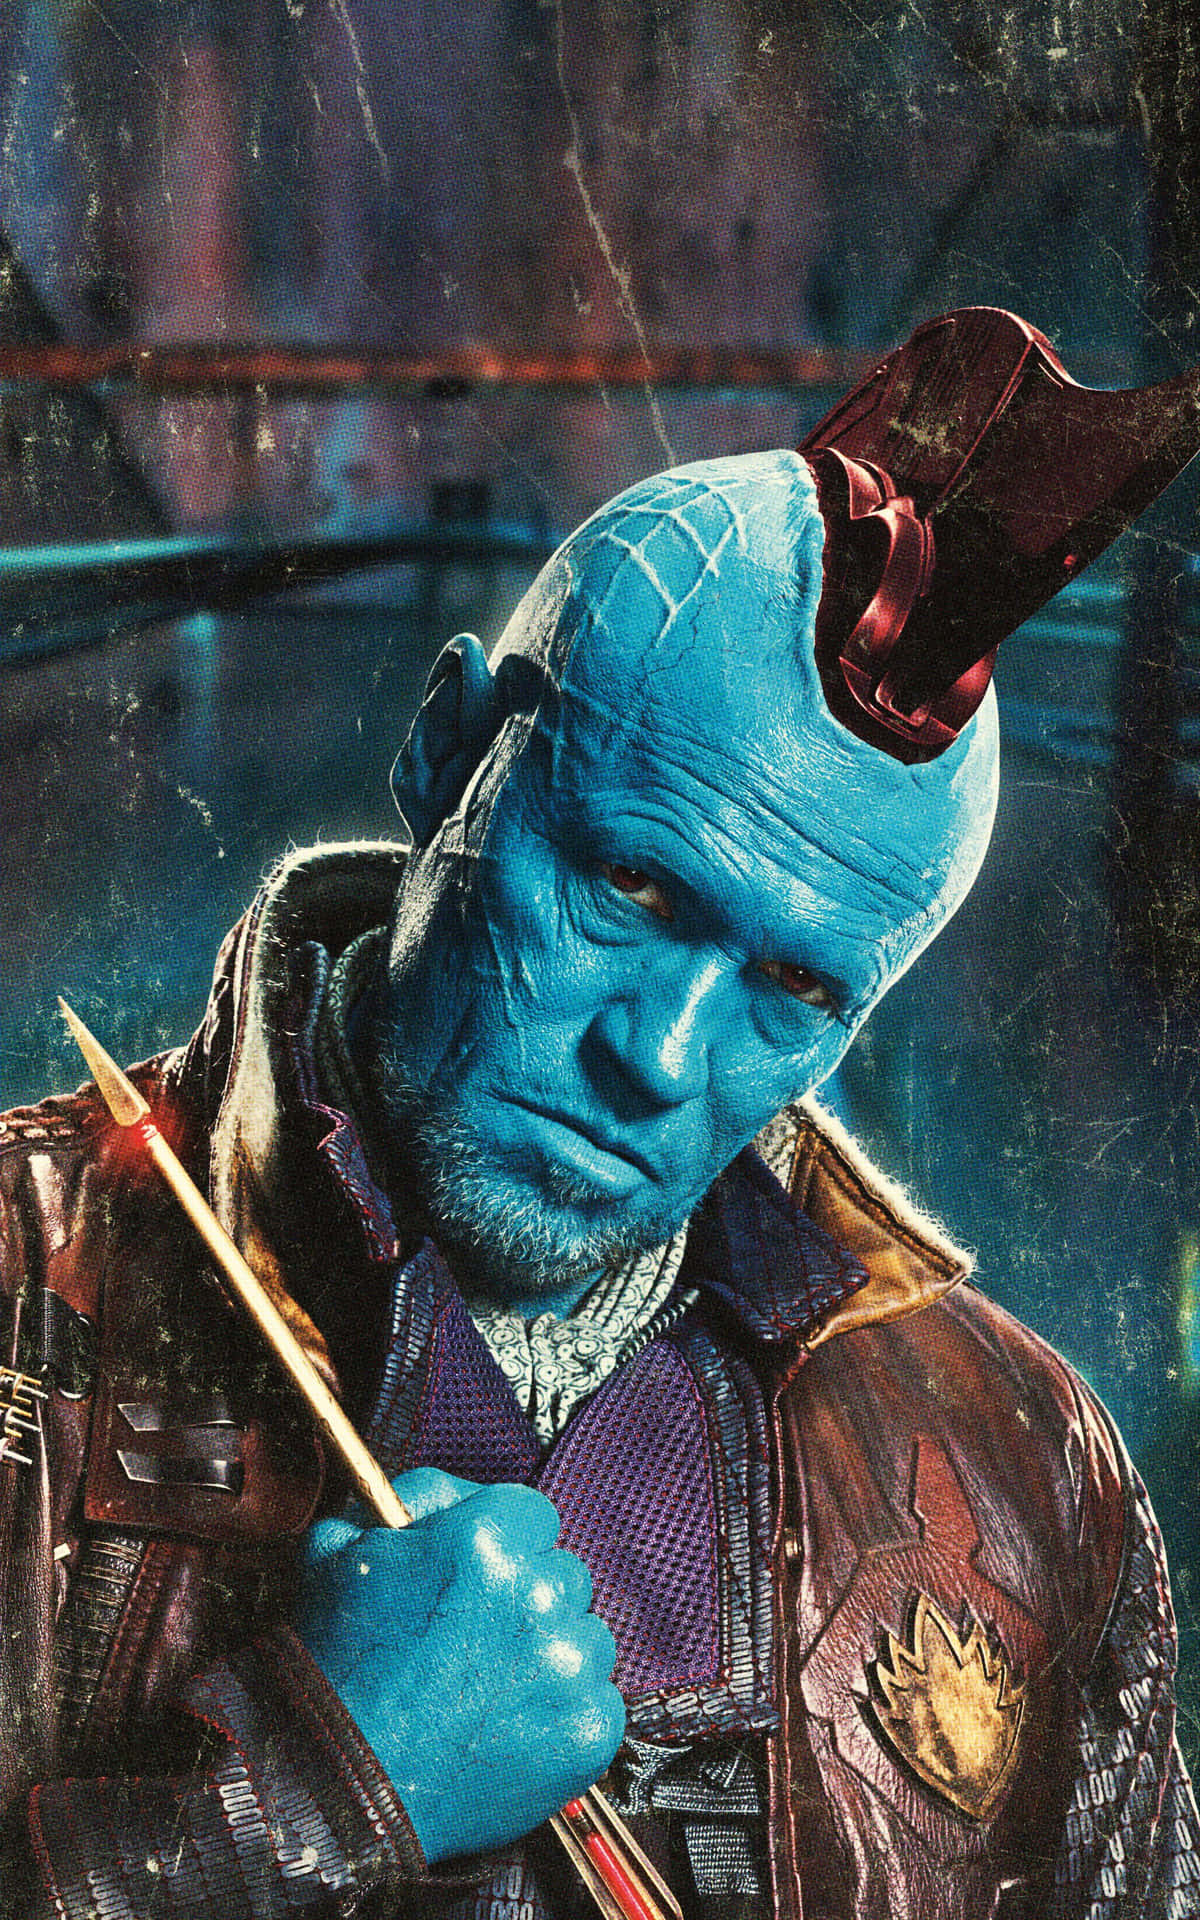 Star-Lord encounters Yondu Udonta in a thrilling battle in Guardians of the Galaxy. Wallpaper